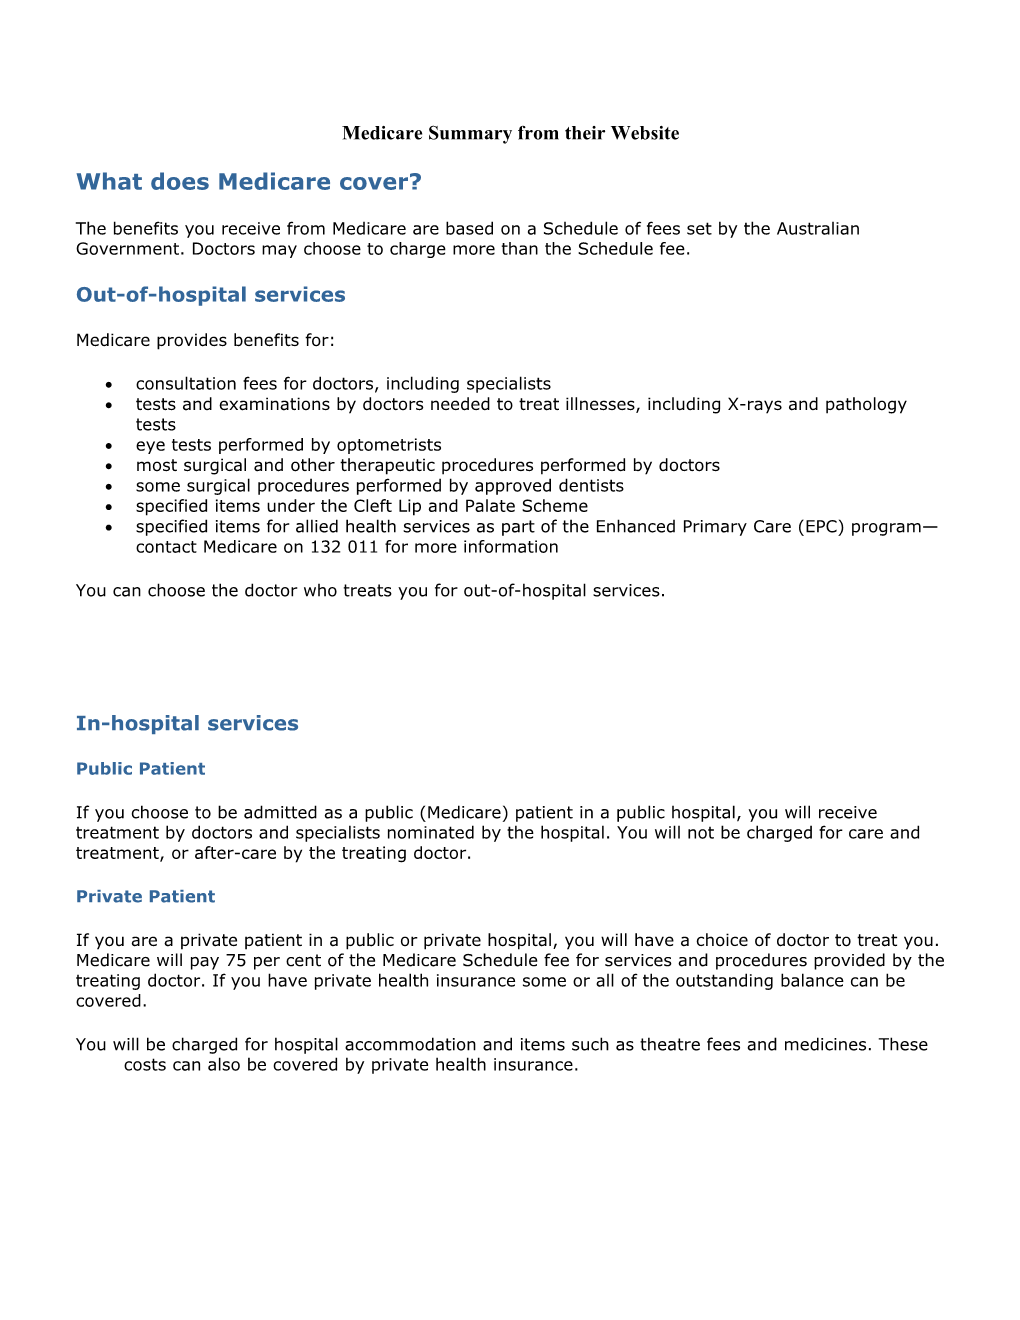 Medicare Summary from Their Website